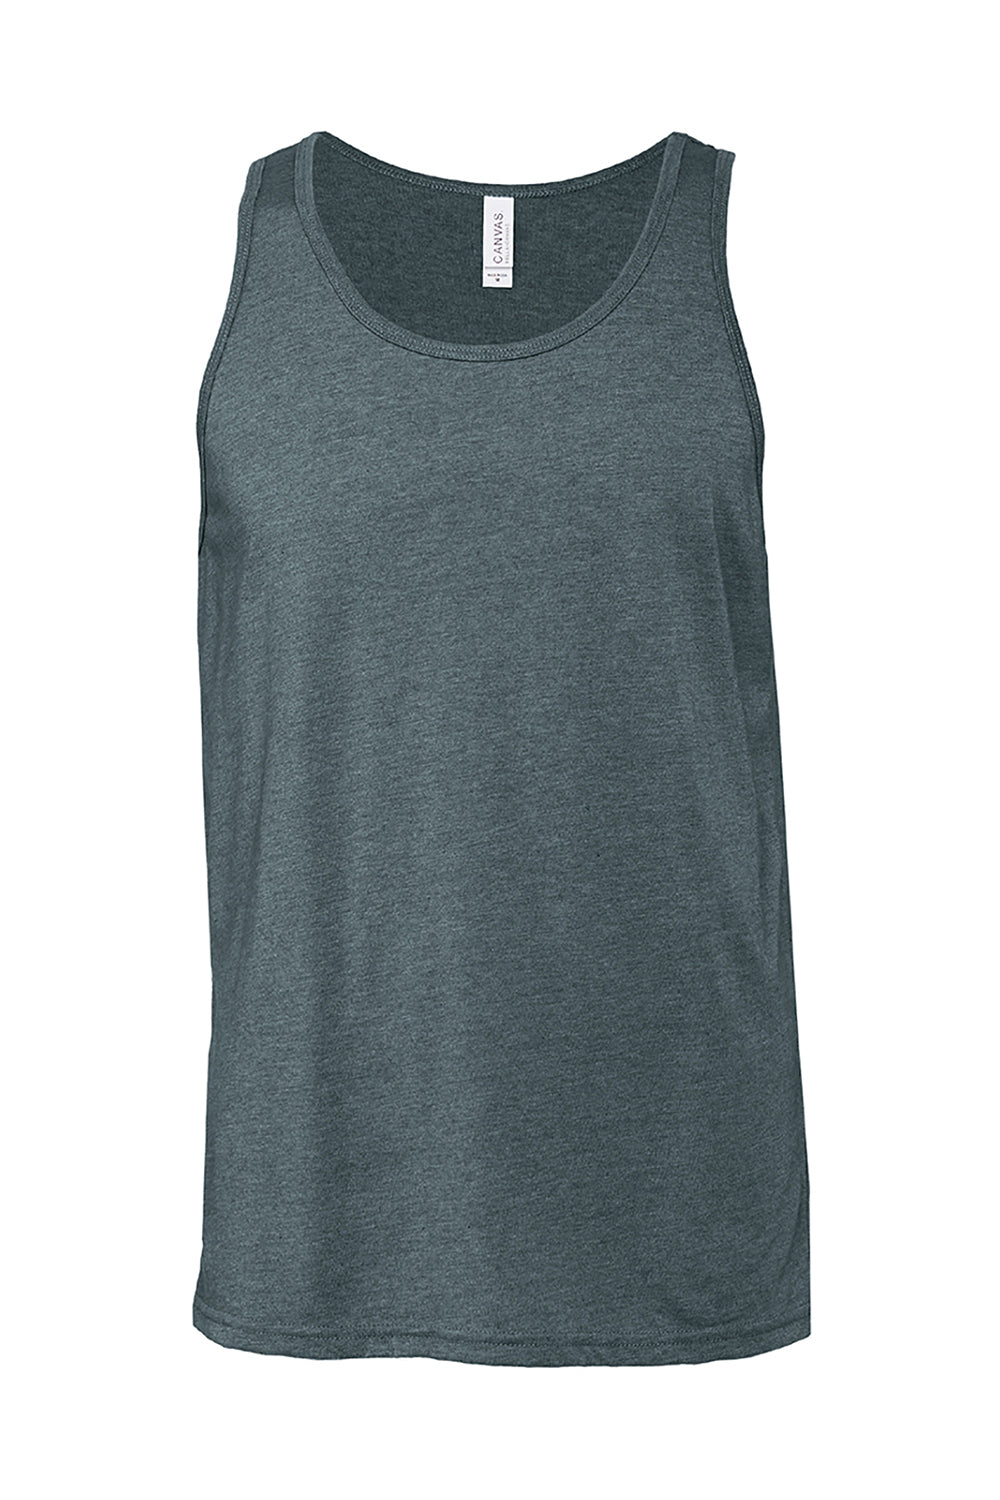 Bella + Canvas BC3480/3480 Mens Jersey Tank Top Heather Slate Blue Flat Front